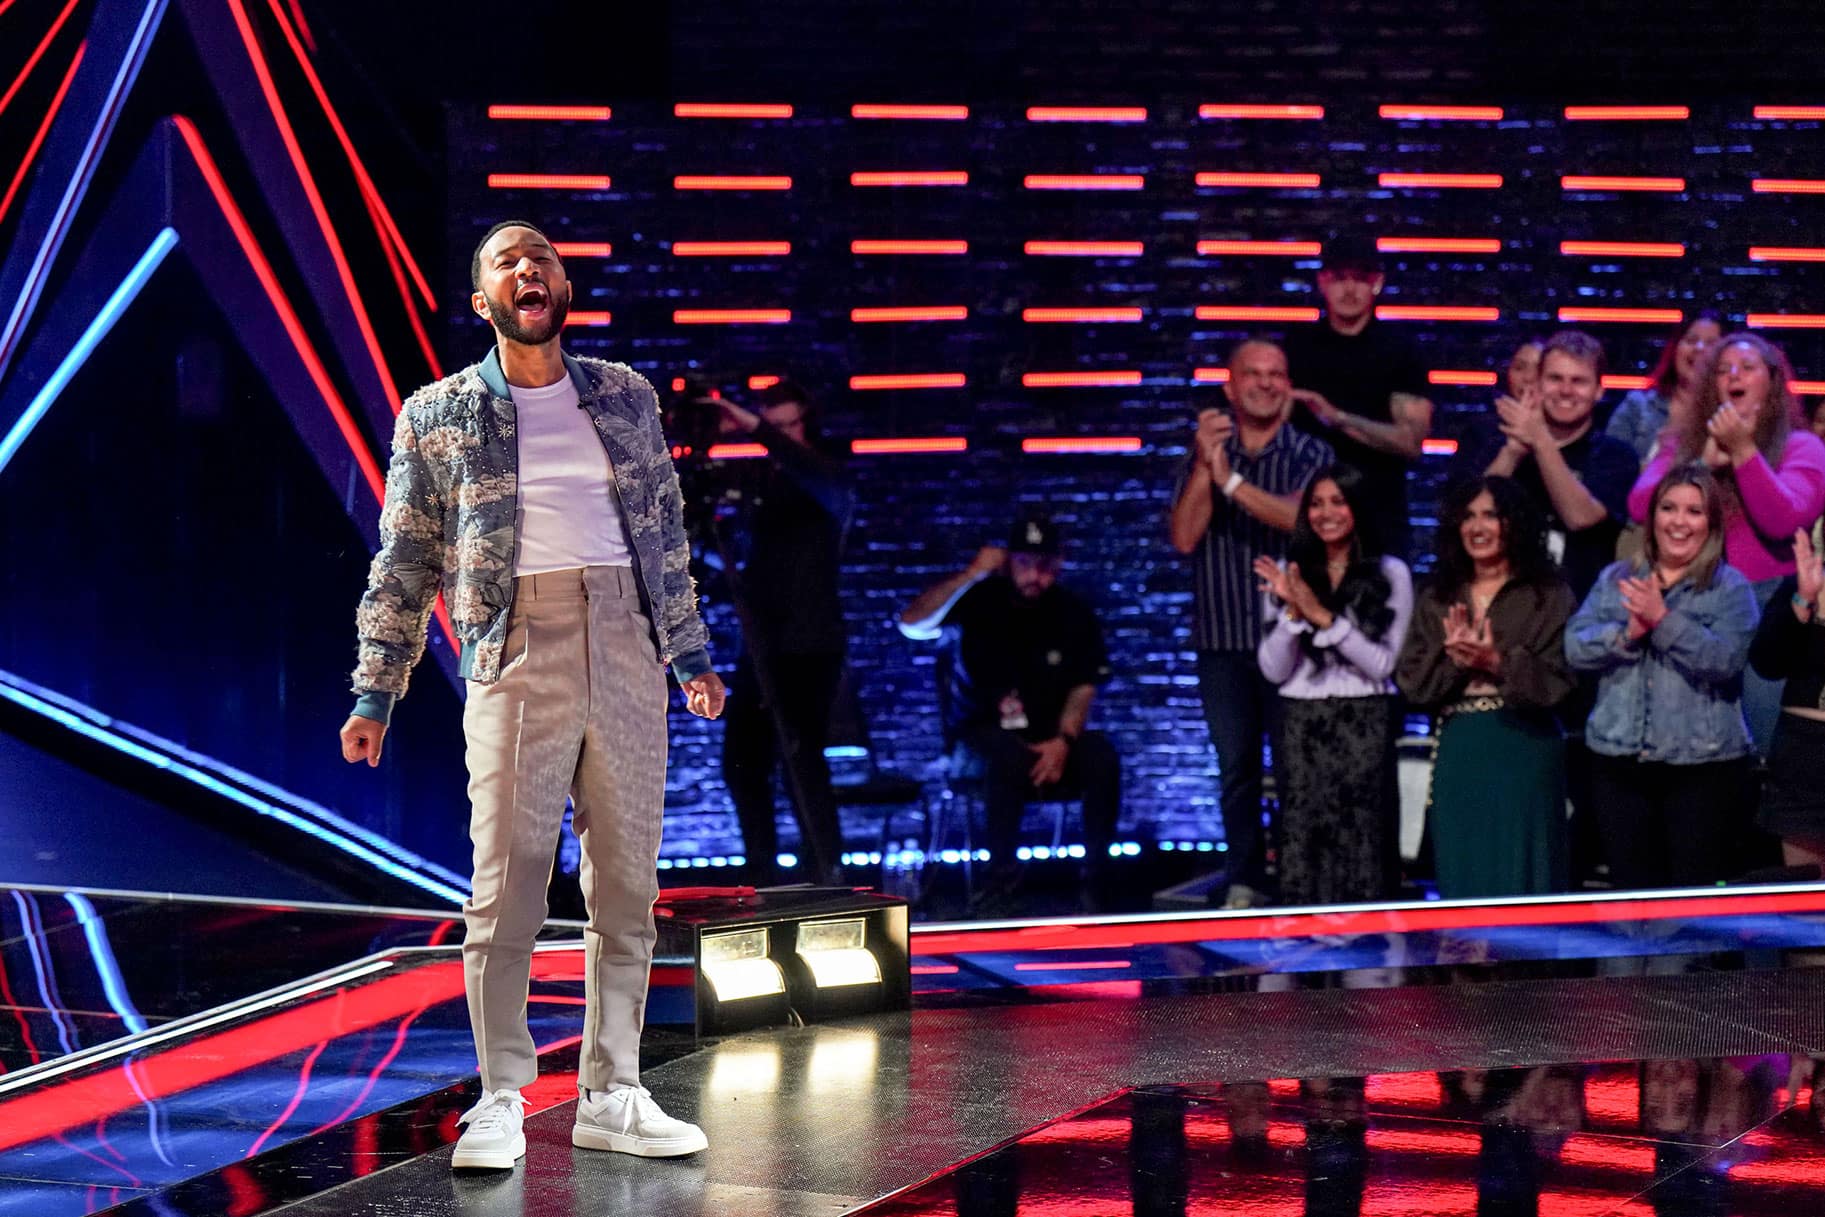 Adam Levine Returns to The Voice After Five Years Joining a Star-Studded Panel